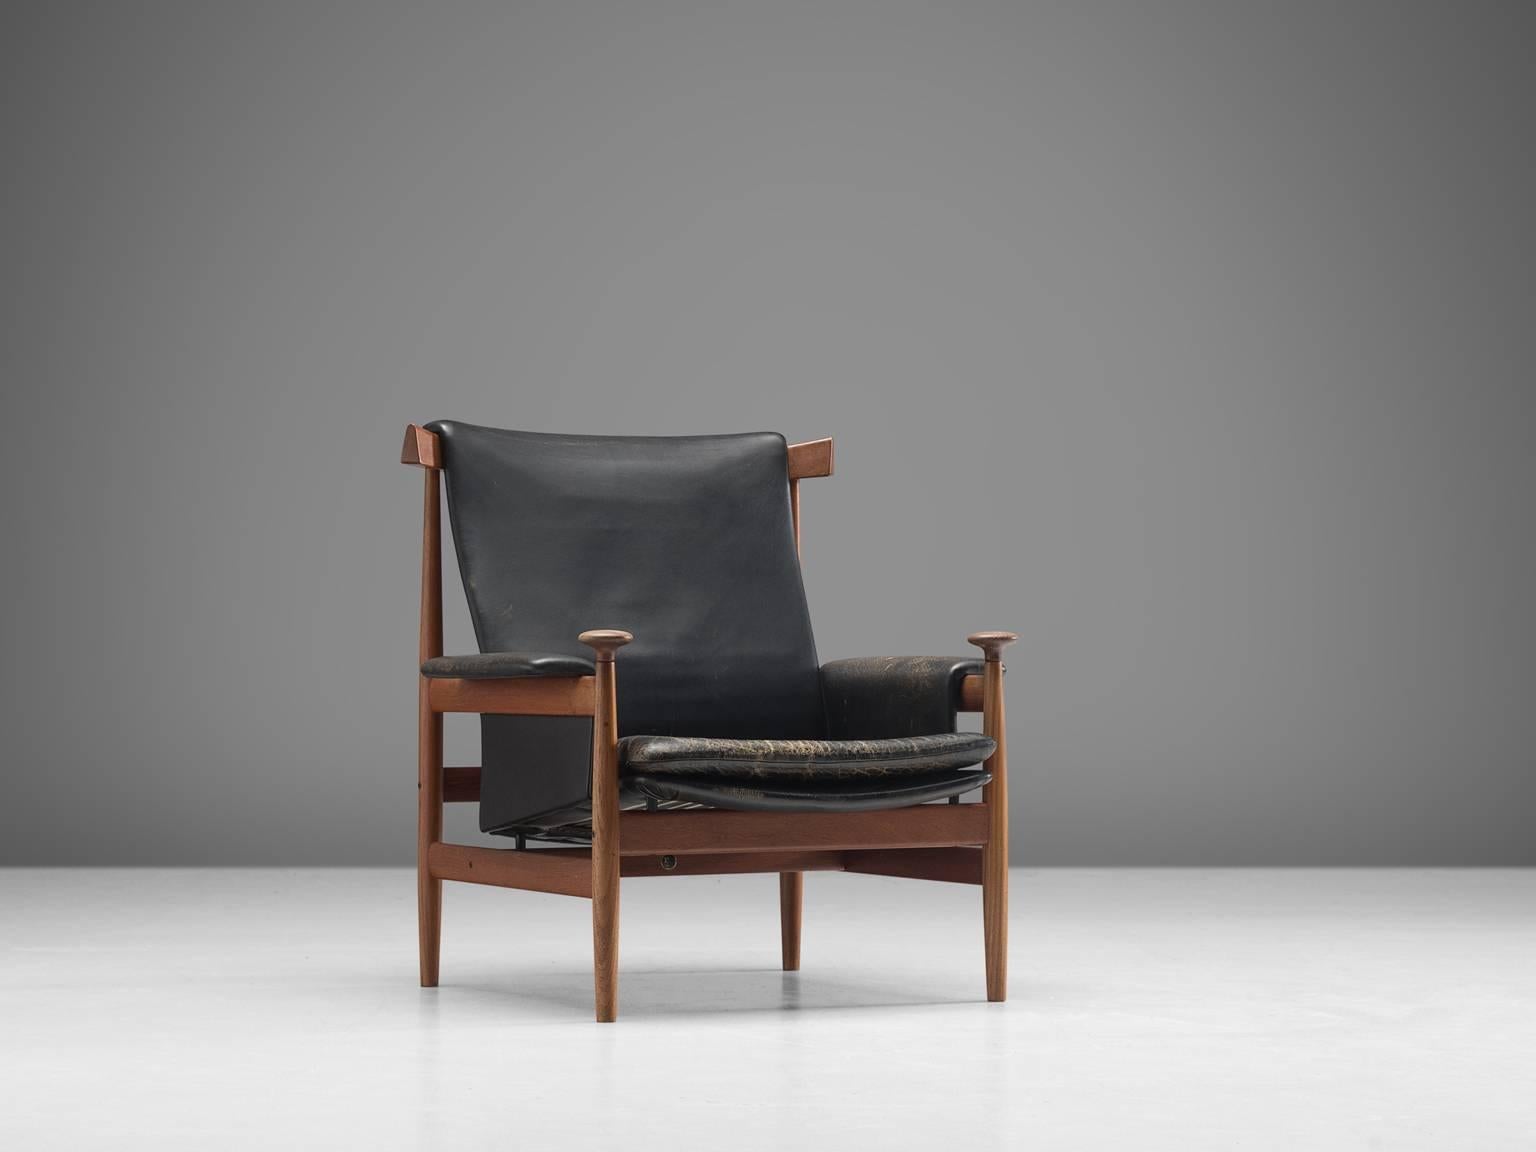 Finn Juhl for France and Son, 'Bwana' lounge chair, in teak and leather, Denmark, 1962 design, 1960s production.

This is an excellent solid teak version of Finn Juhl's 'Bwana' chair. The 